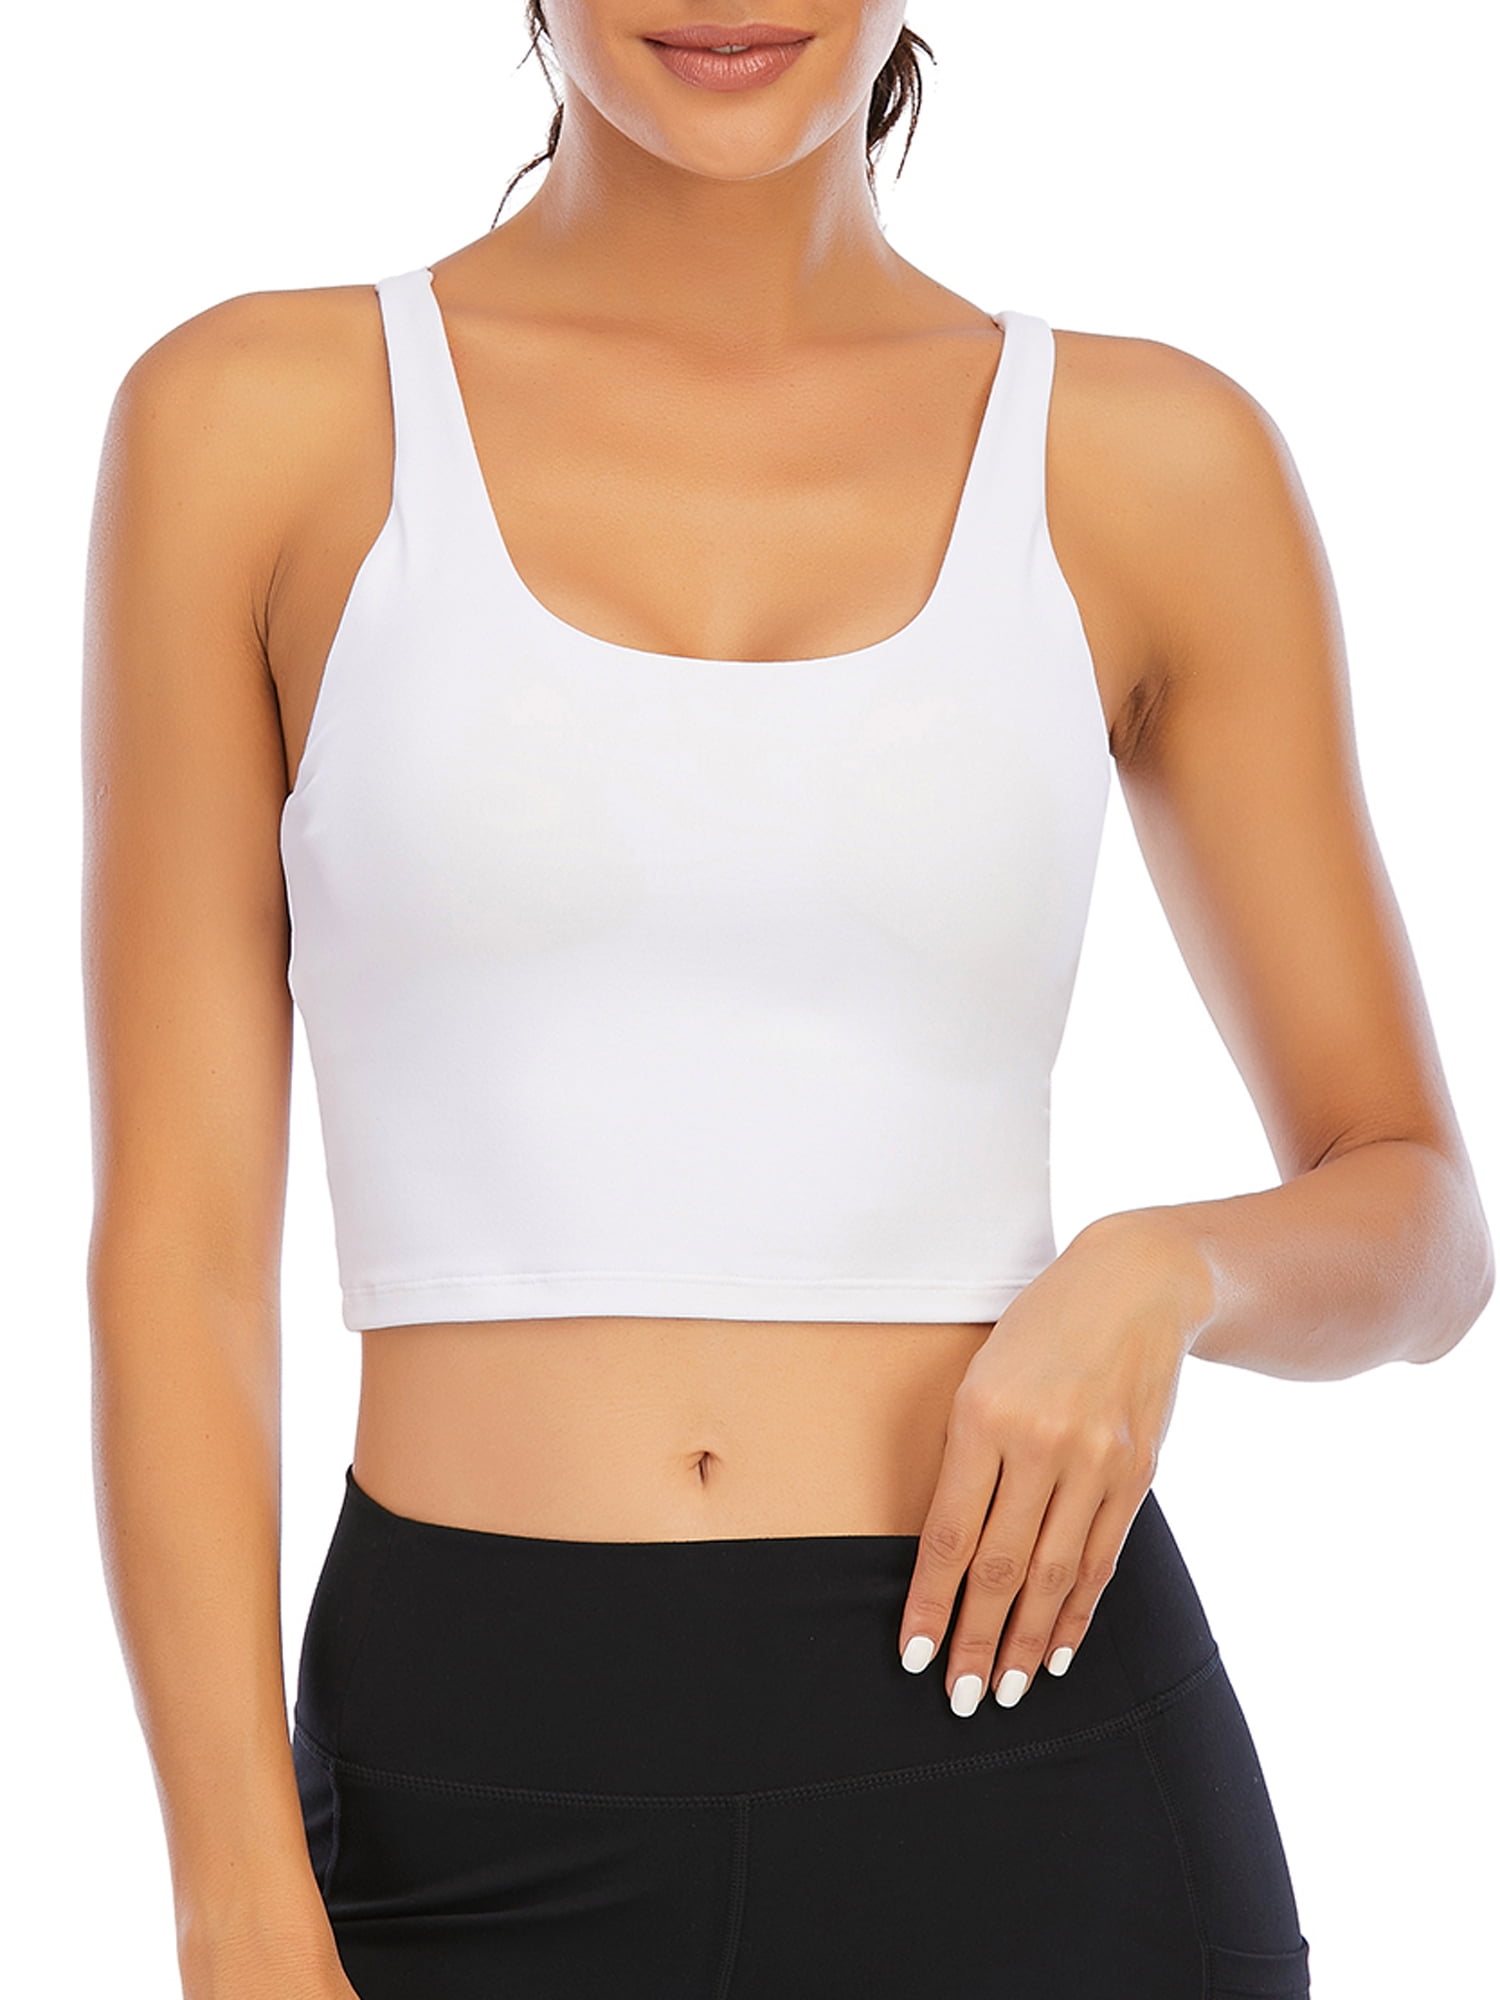 LELINTA Padded Sports Bra for Women Workout Fitness Running Crop Yoga Tank  Tops with Built in Bra Camisole Longline Shirts 